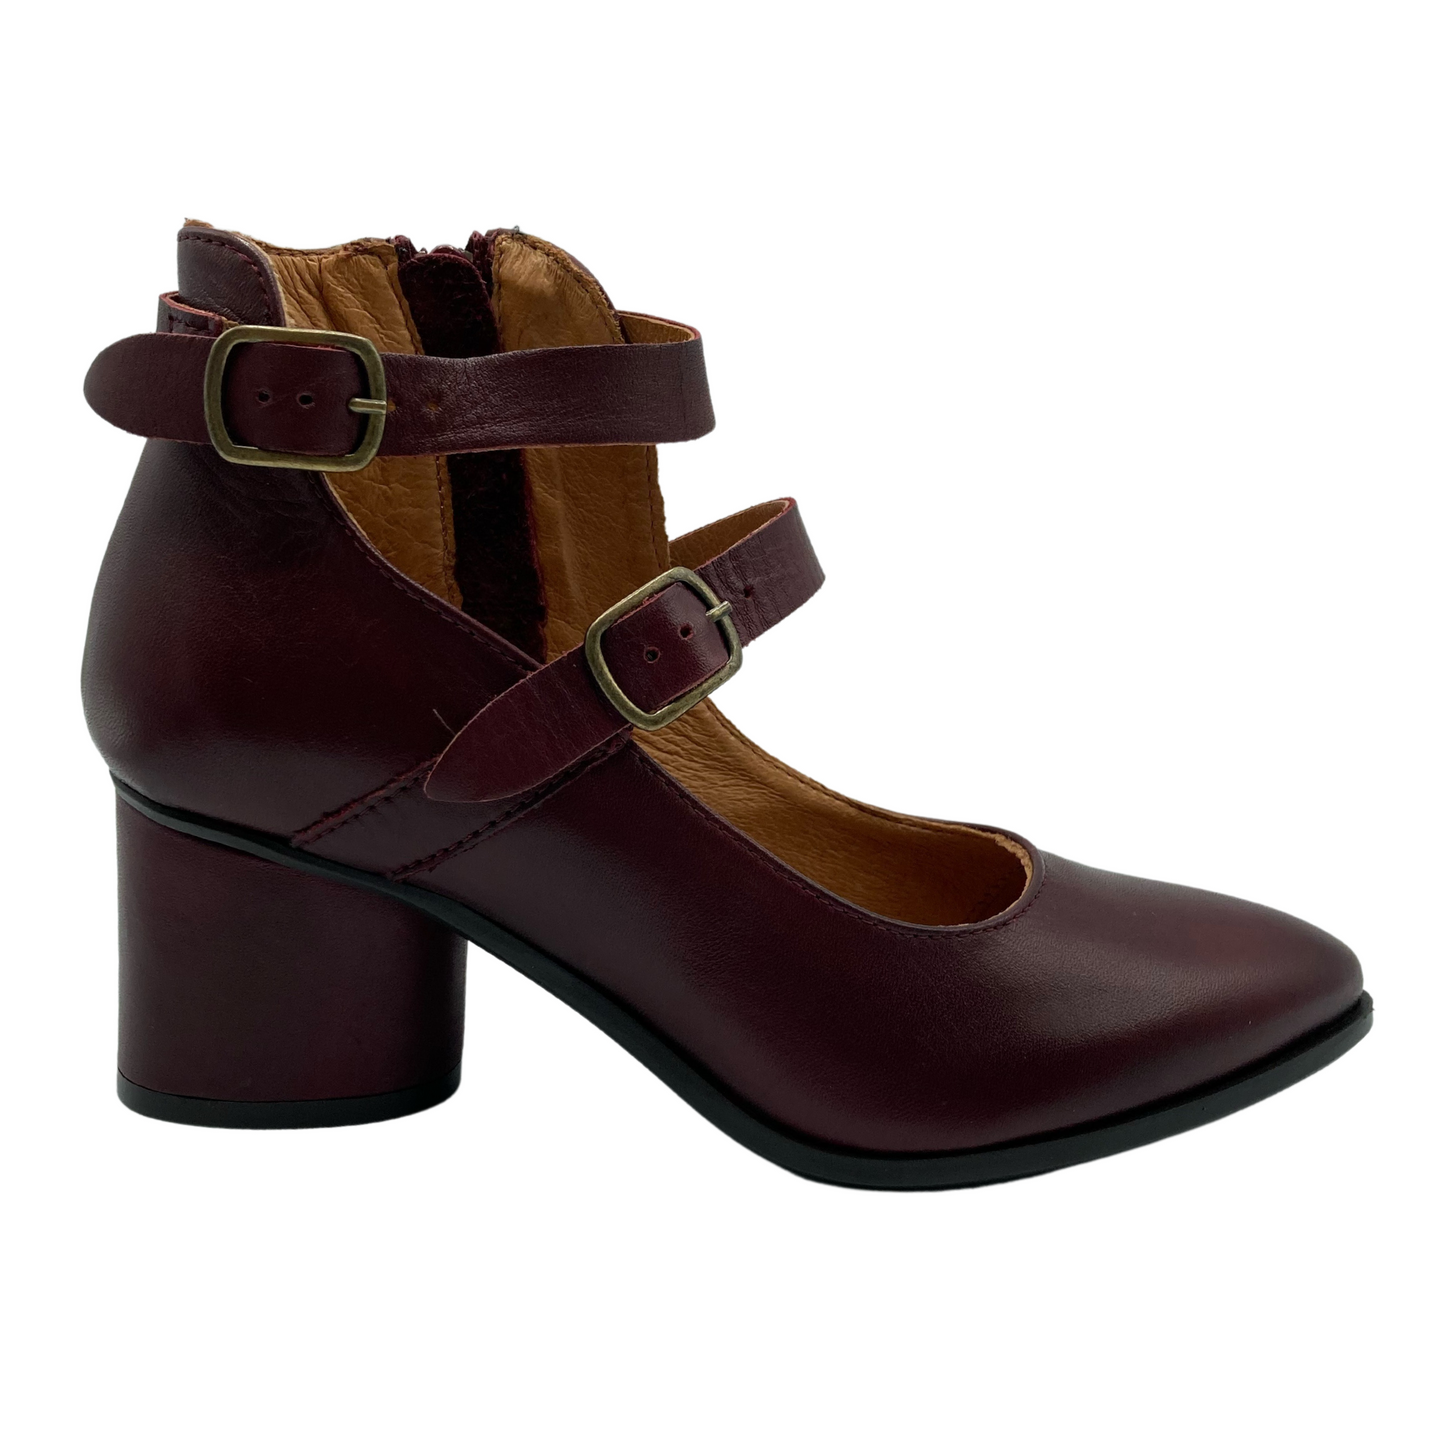 Right facing view of wine coloured leather shoe with pointed toe, block heel and double straps on upper